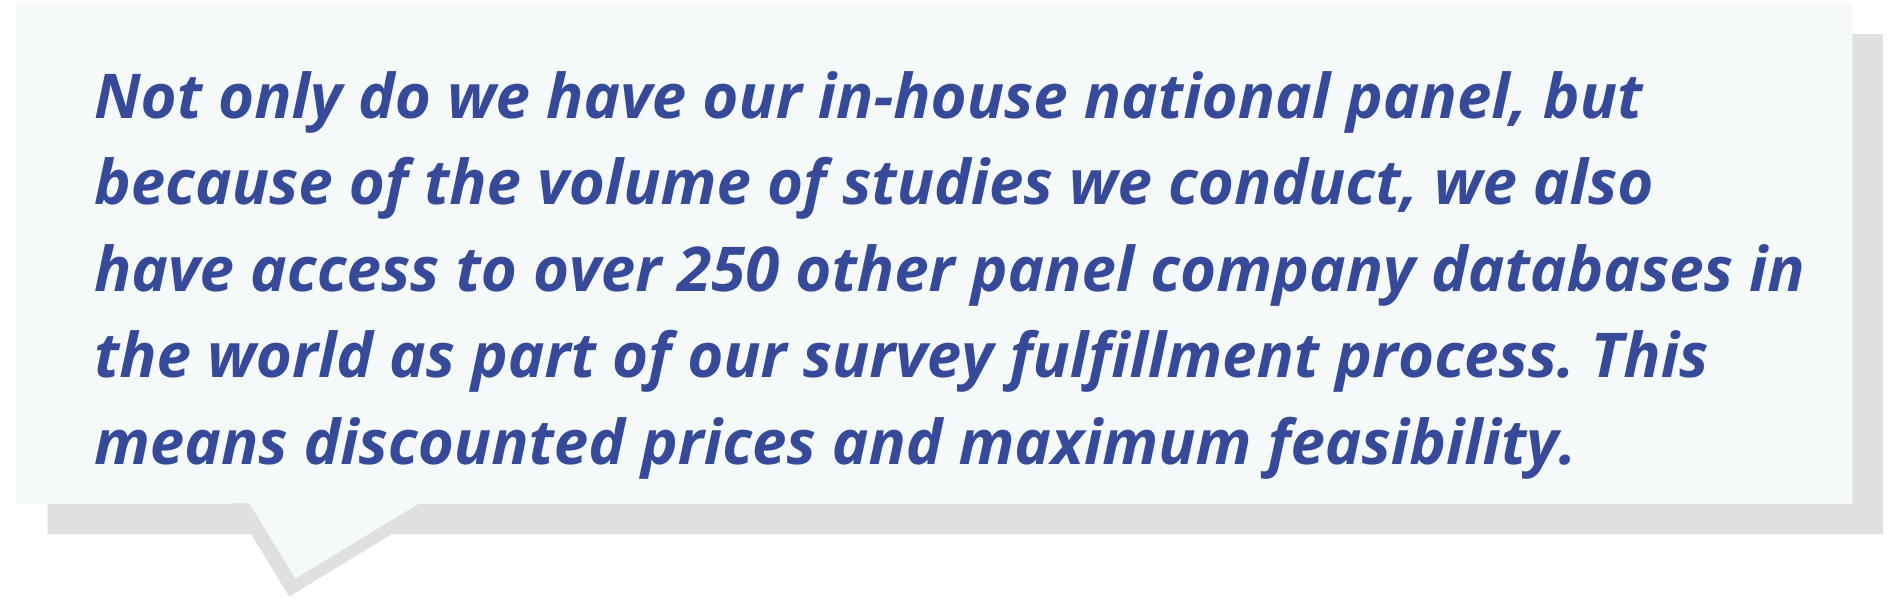 Not only do we have our in-house national panel, but because of the volume of studies we conduct, we also have access to over 250 other panel company databases in the world as part of our survey fulfillment process. This means discounted prices and maximum feasibility.